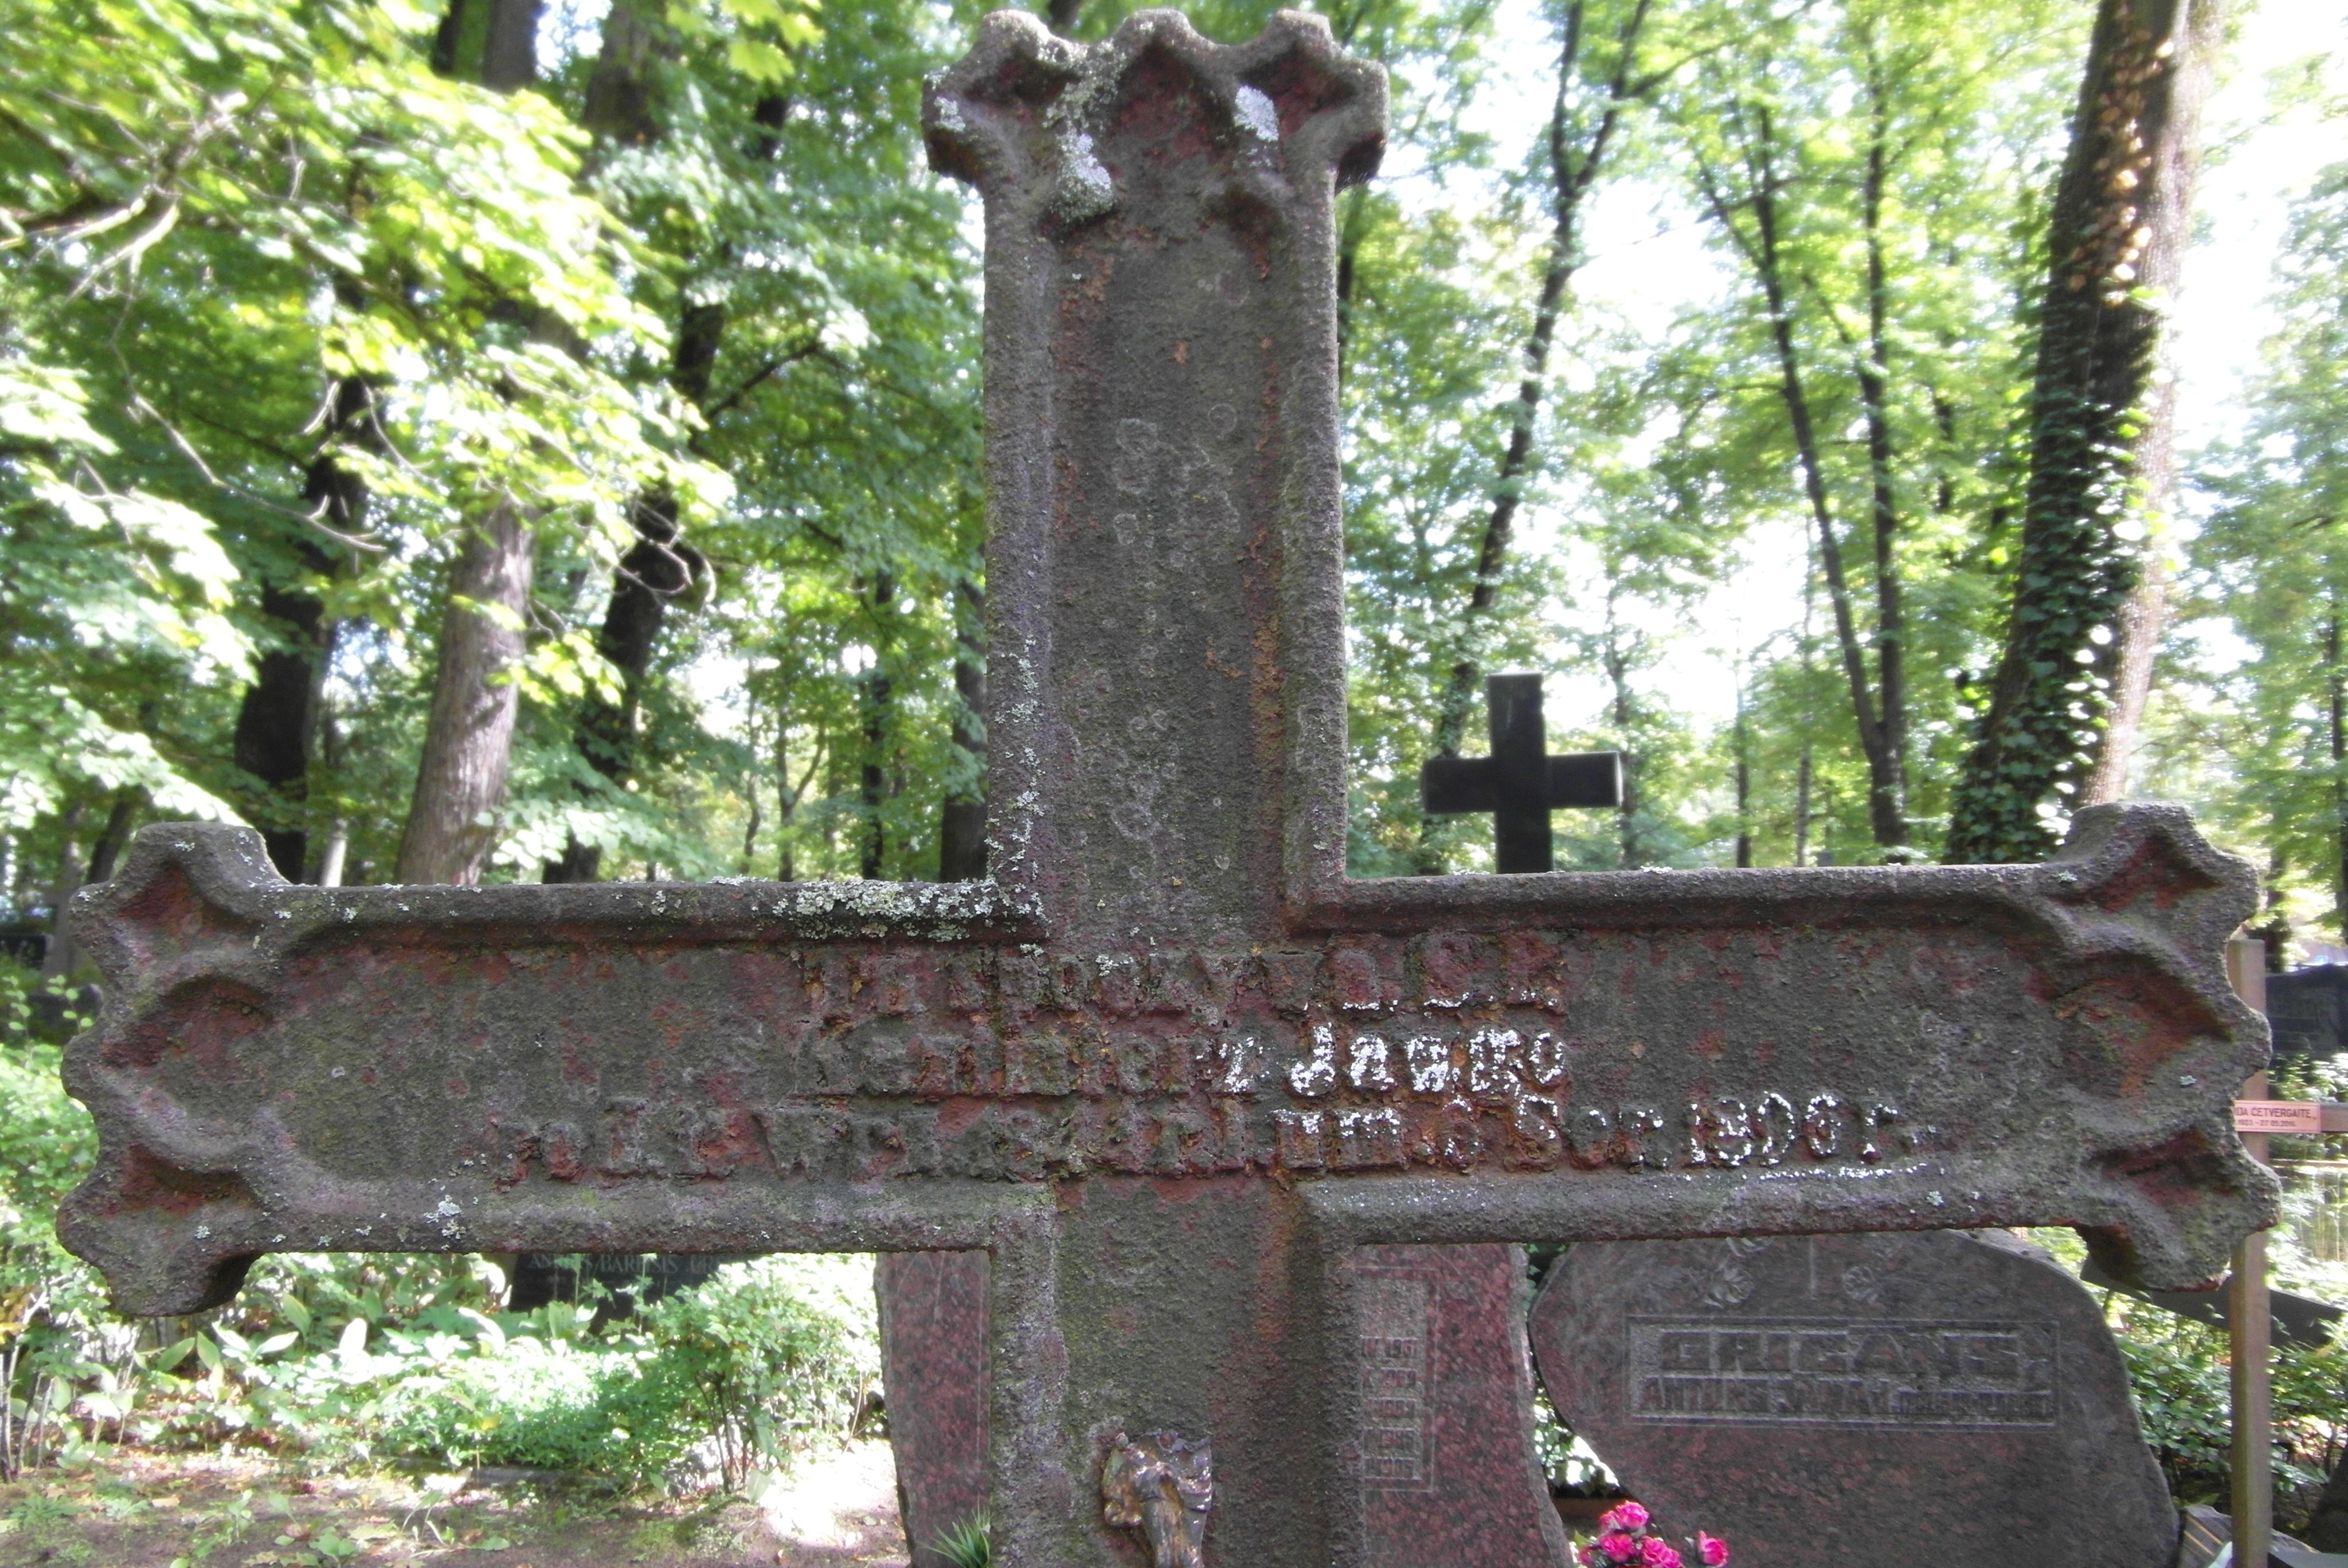 Inscription from the tombstone of Casimir Jawgo, St Michael's cemetery in Riga, as of 2021.